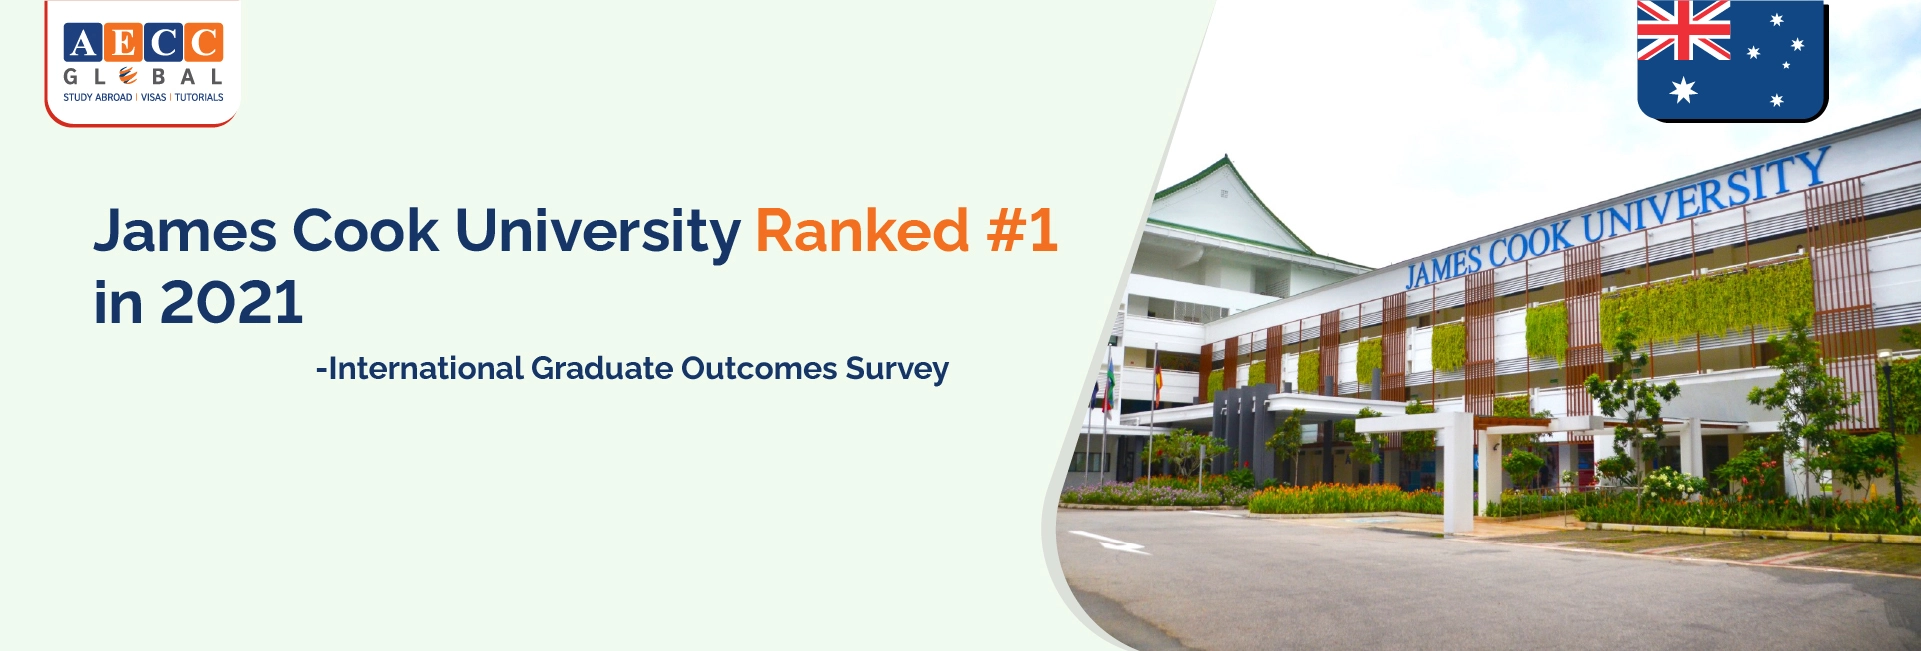 James Cook University ranked #1 in the 2021 International Graduate Outcomes Survey